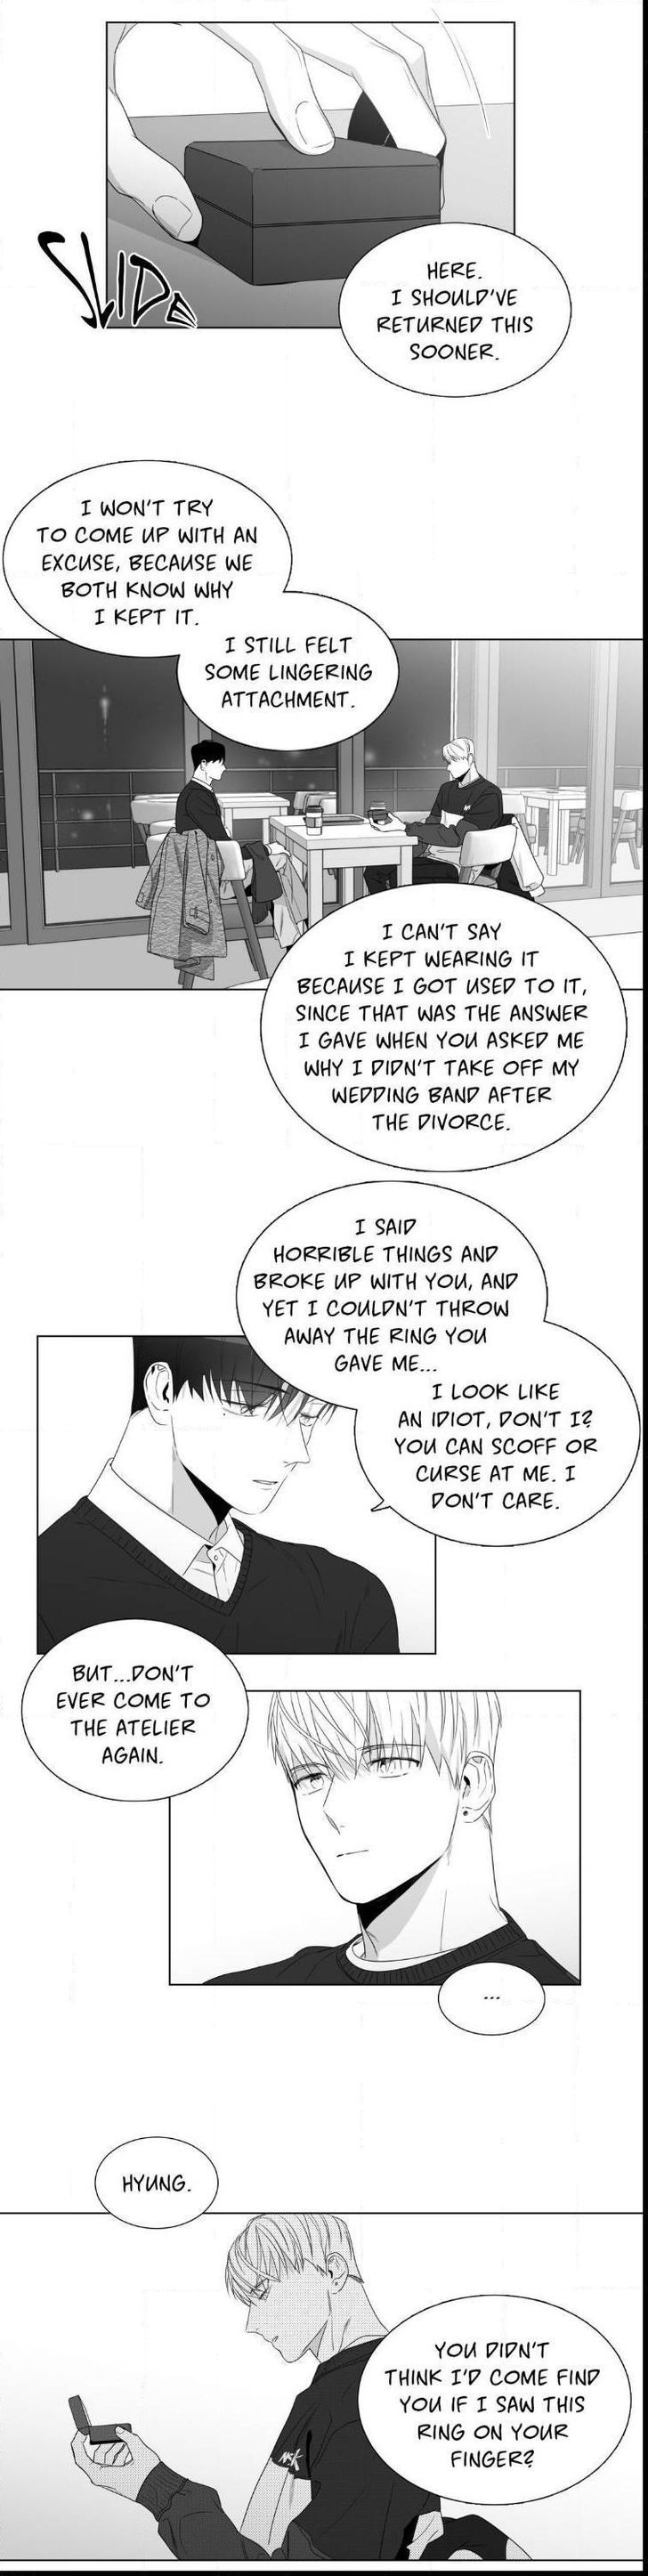 Lover Boy (Lezhin) Chapter 051 page 12